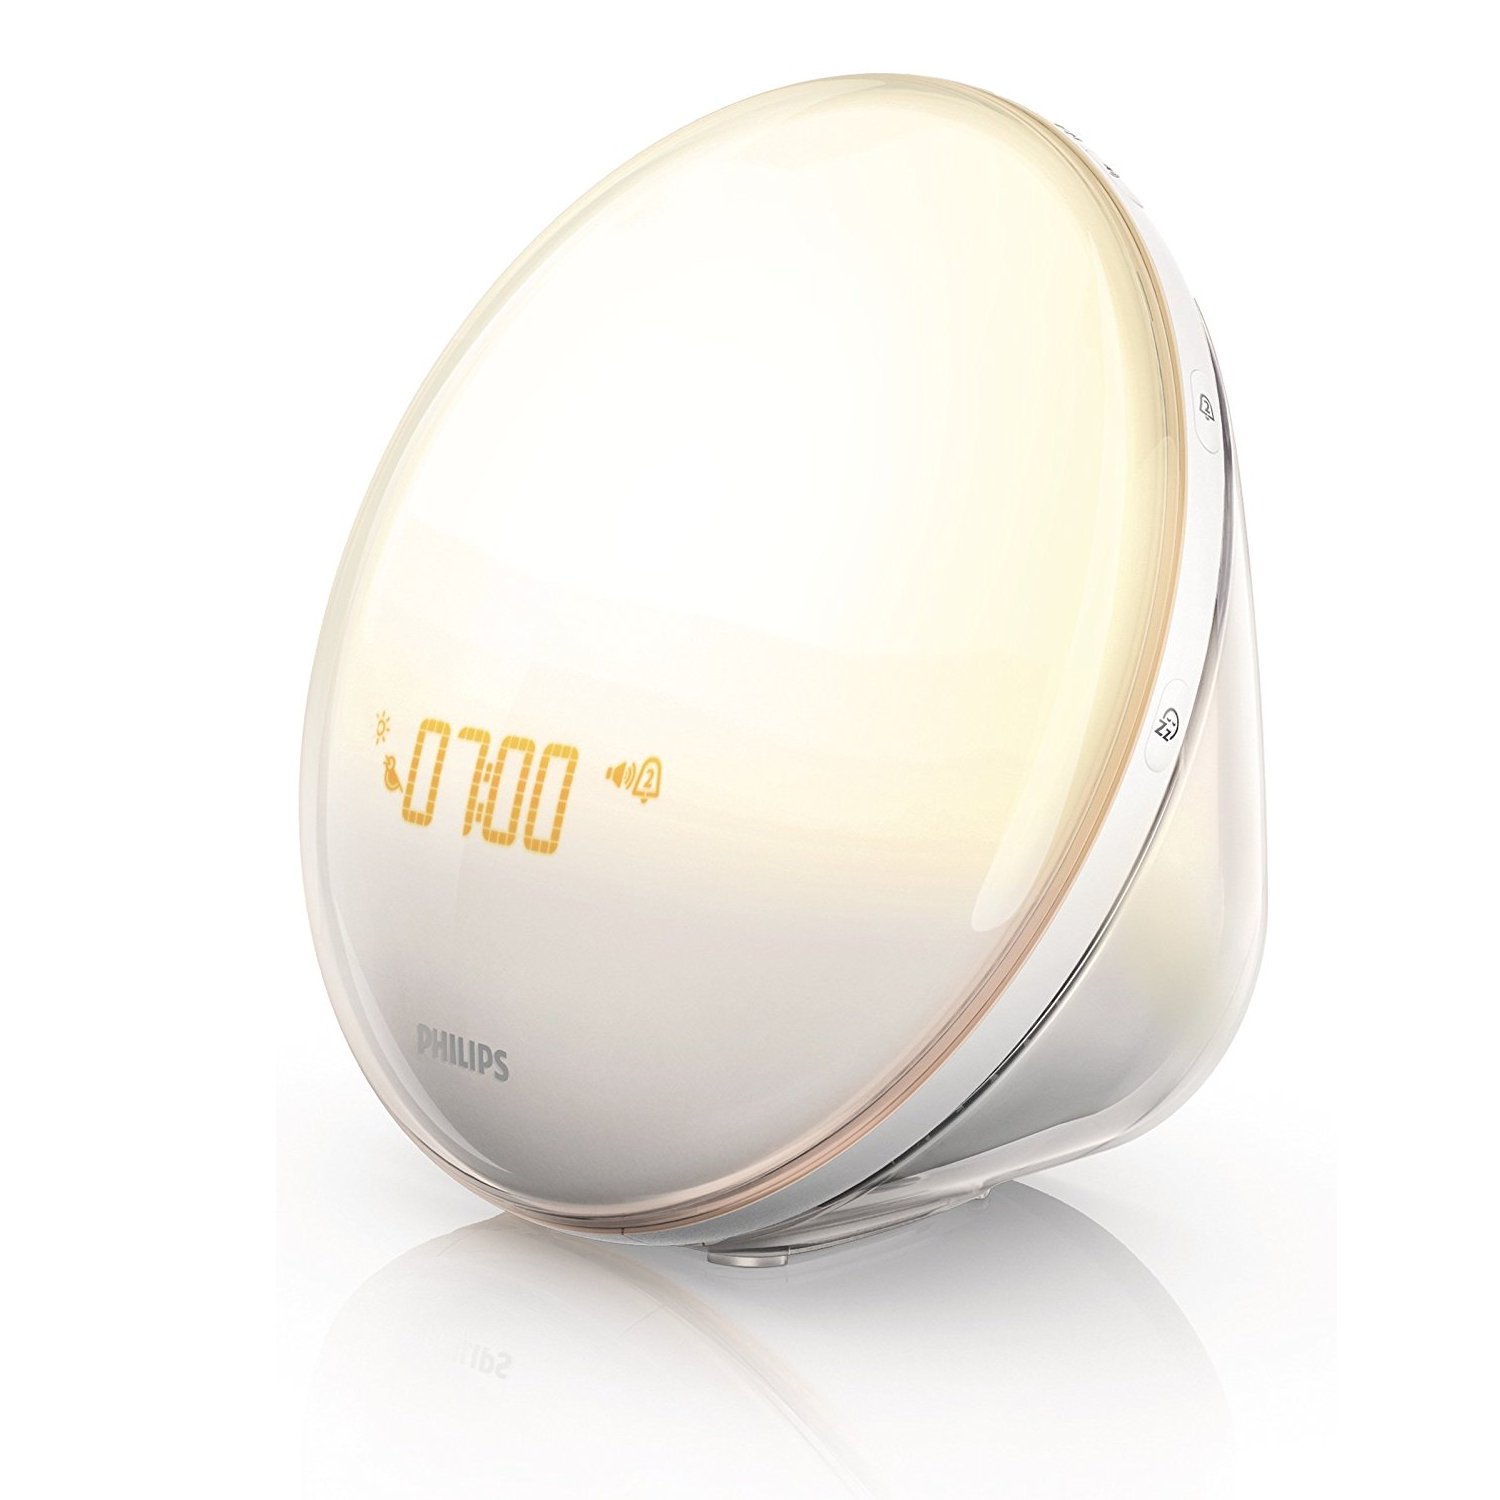 Philips Wake-Up Light with Colored Sunrise Simulation Now $25 OFF!!